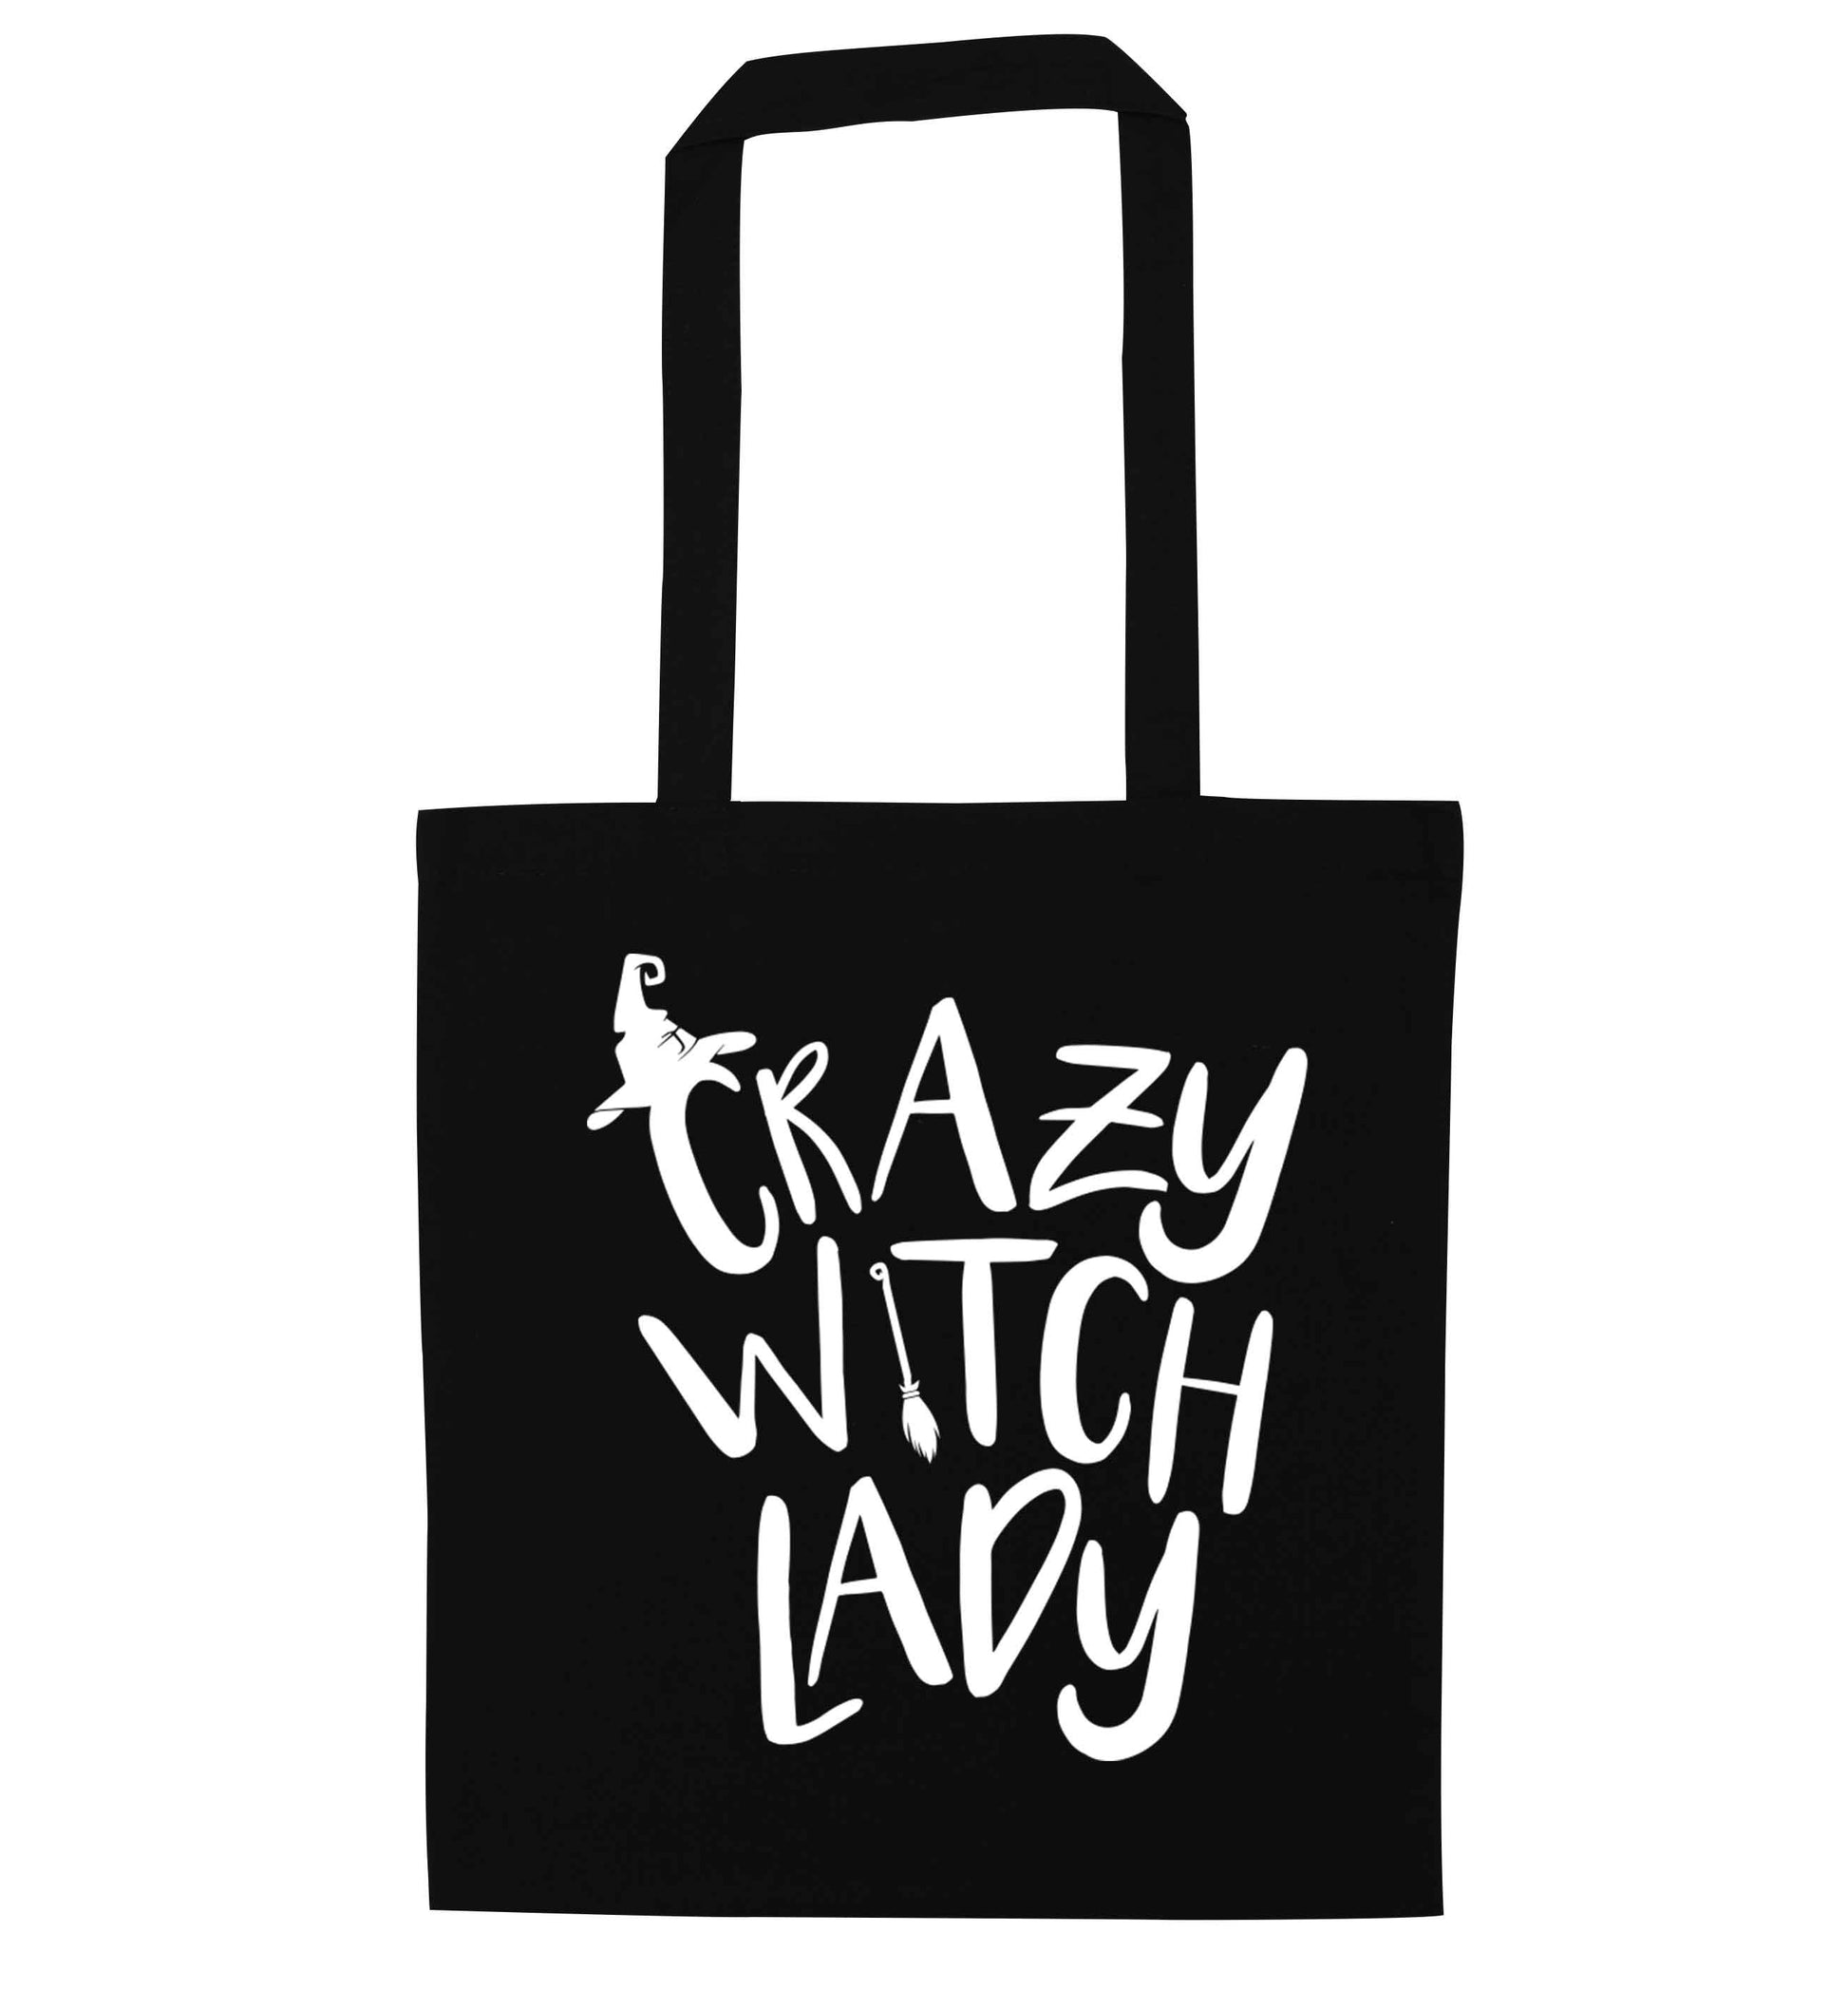 Crazy witch lady black tote bag